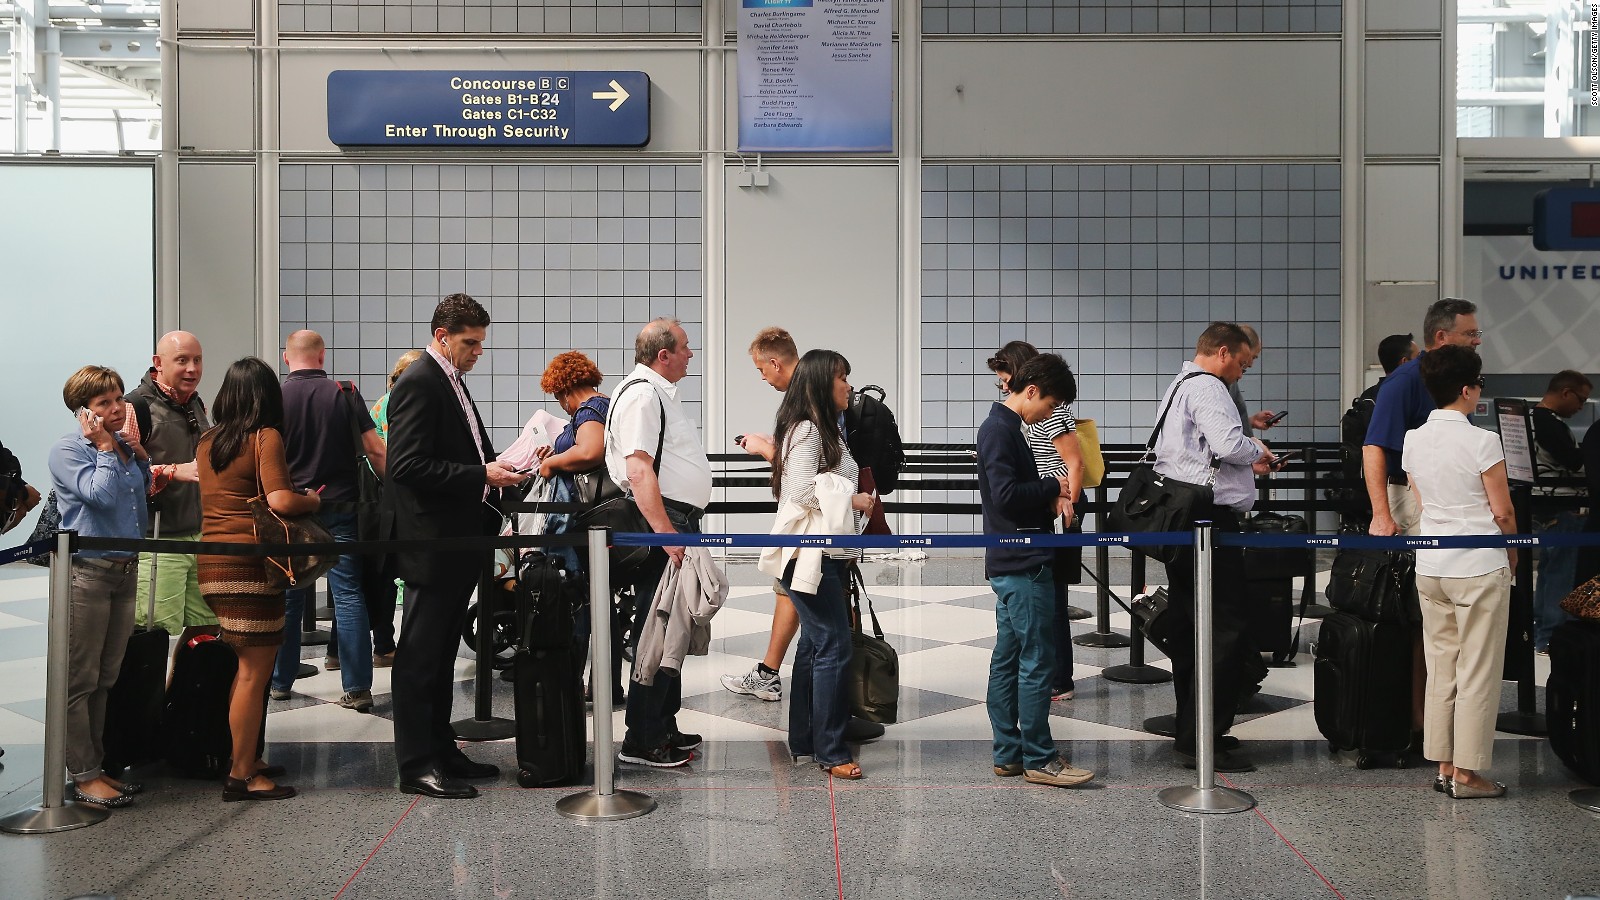 How to Spend Less Time in an Airport Security Line | The WealthAdvisor